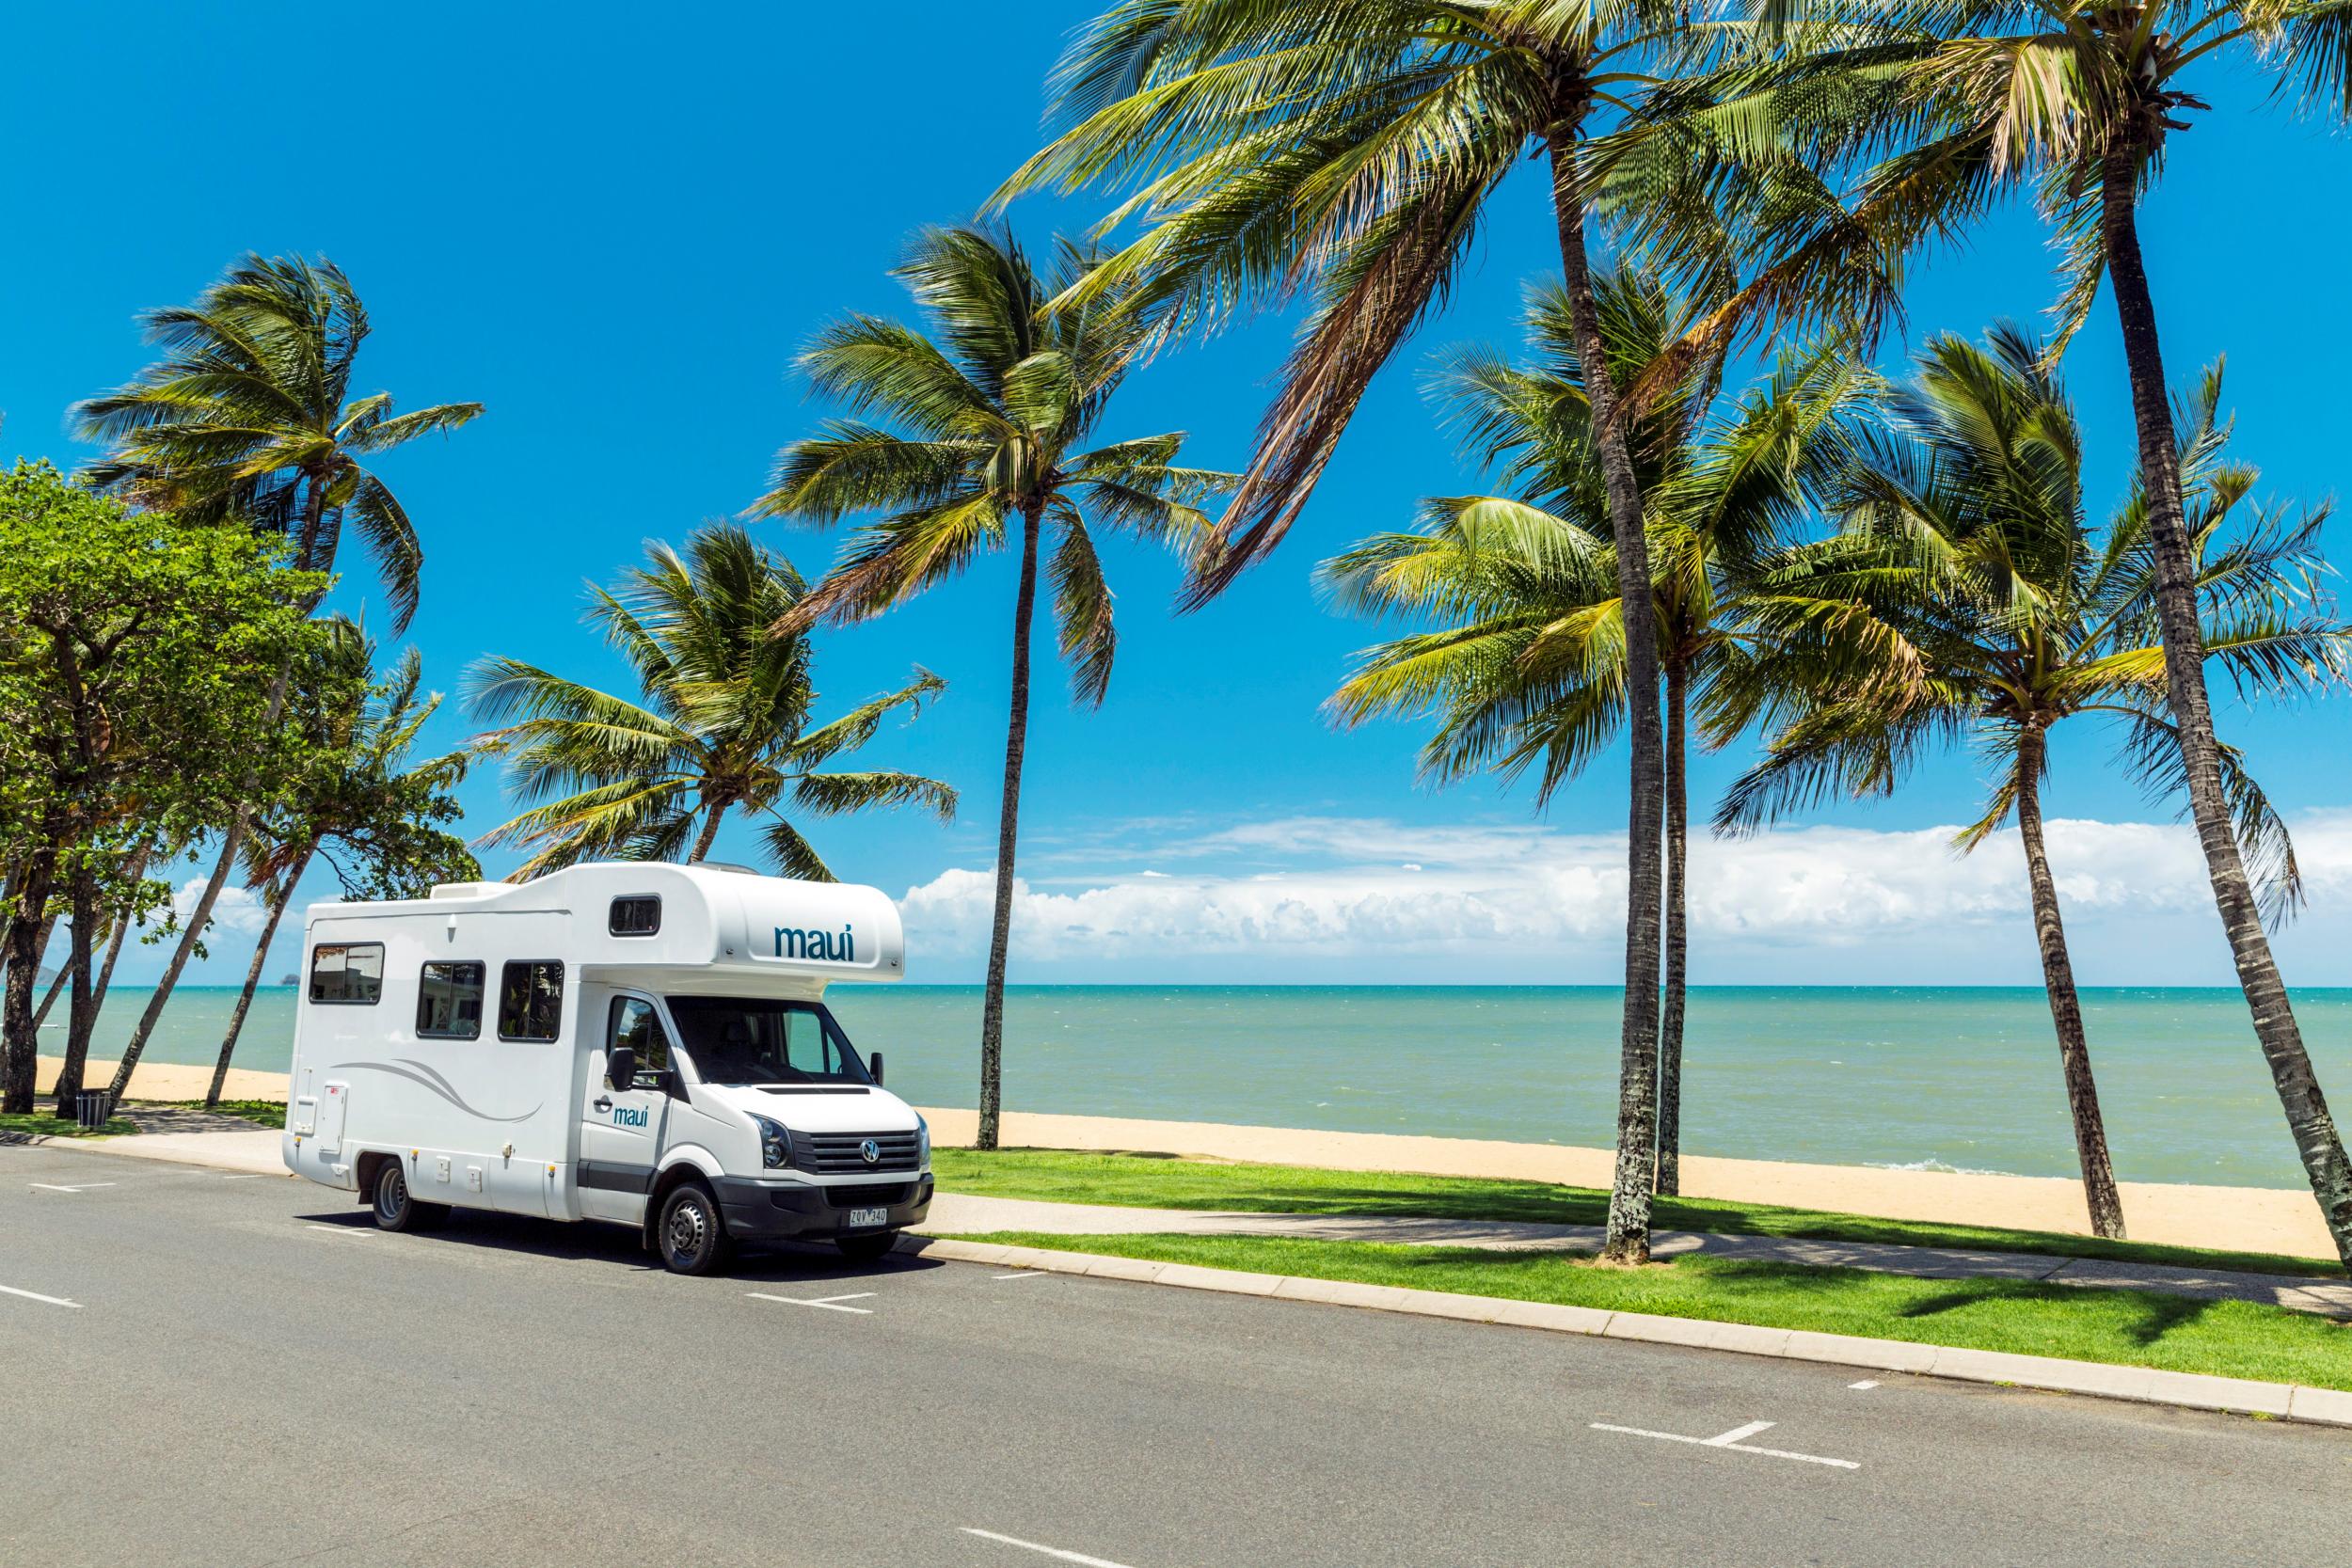 Maui campervan rentals are a great way to get around